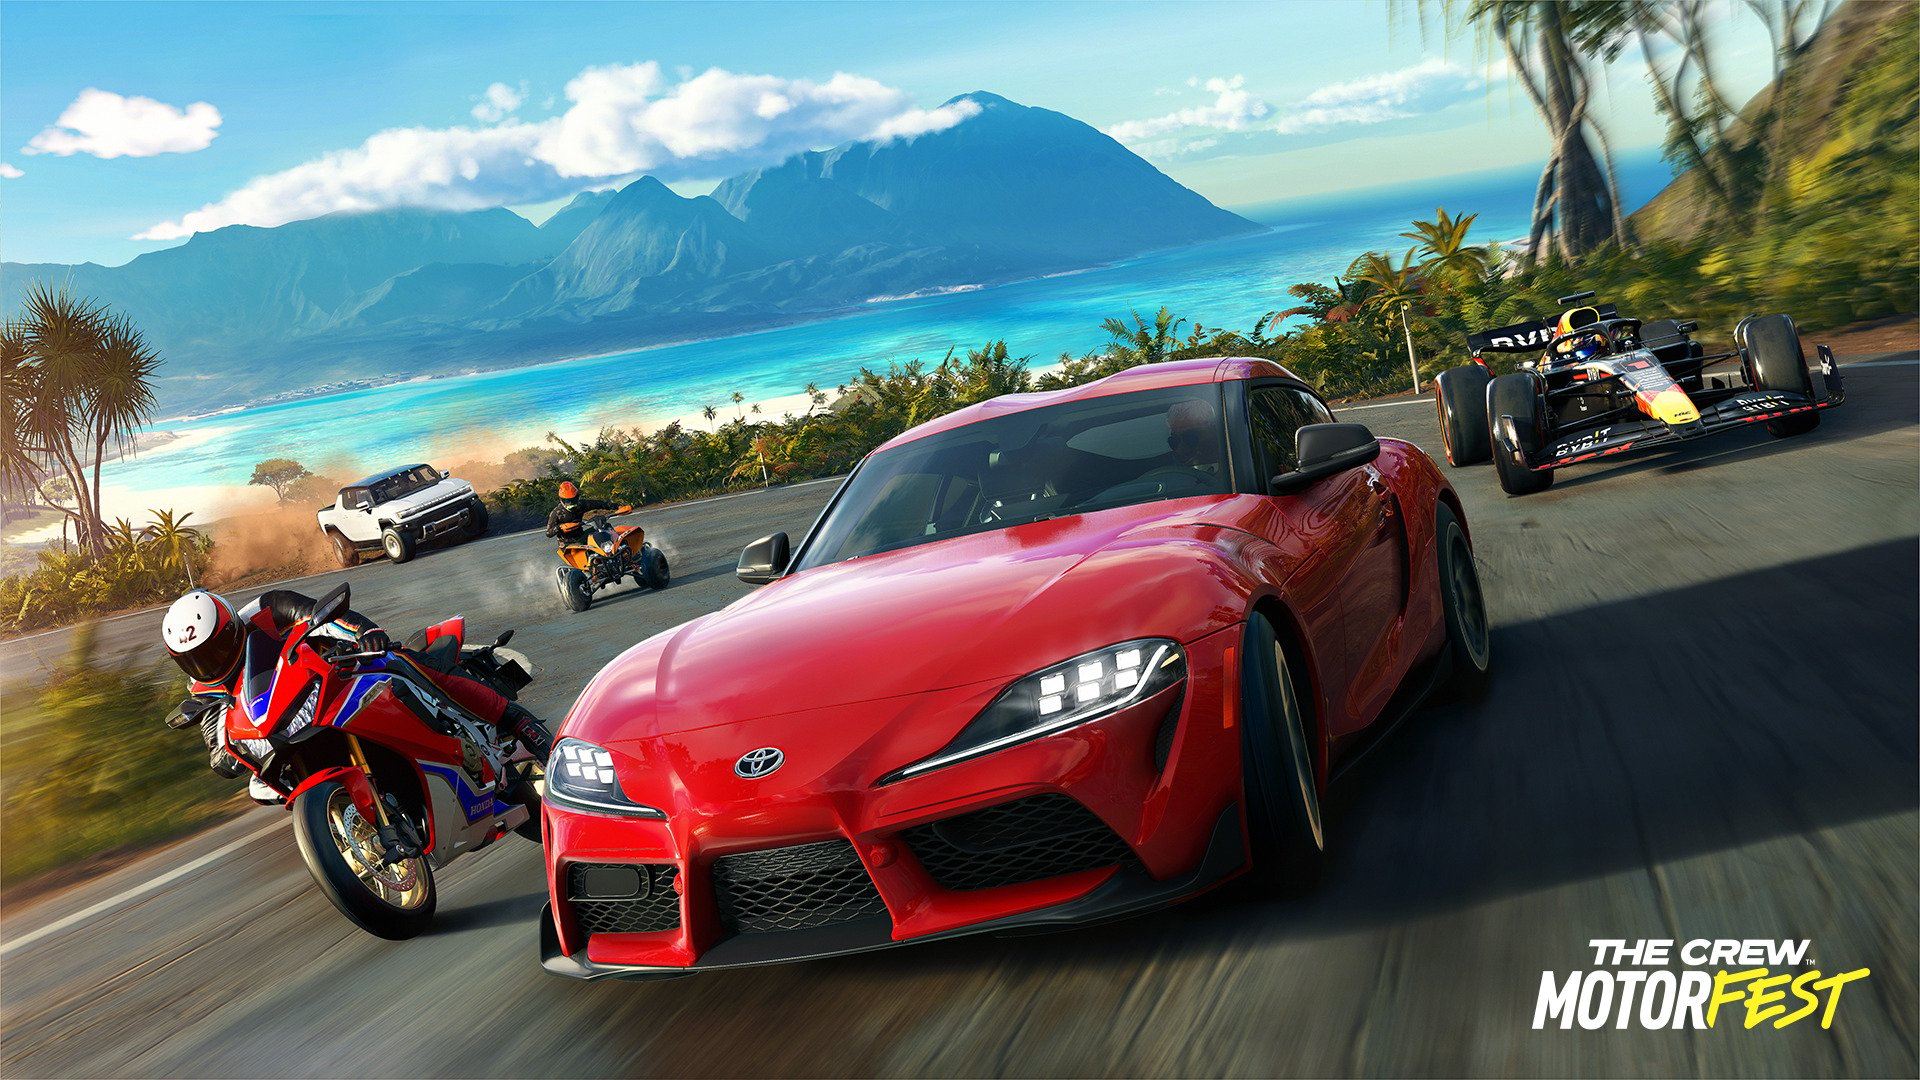 The Crew Motorfest Should Be Considered as Forza Horizon’s Sibling, Not Rival